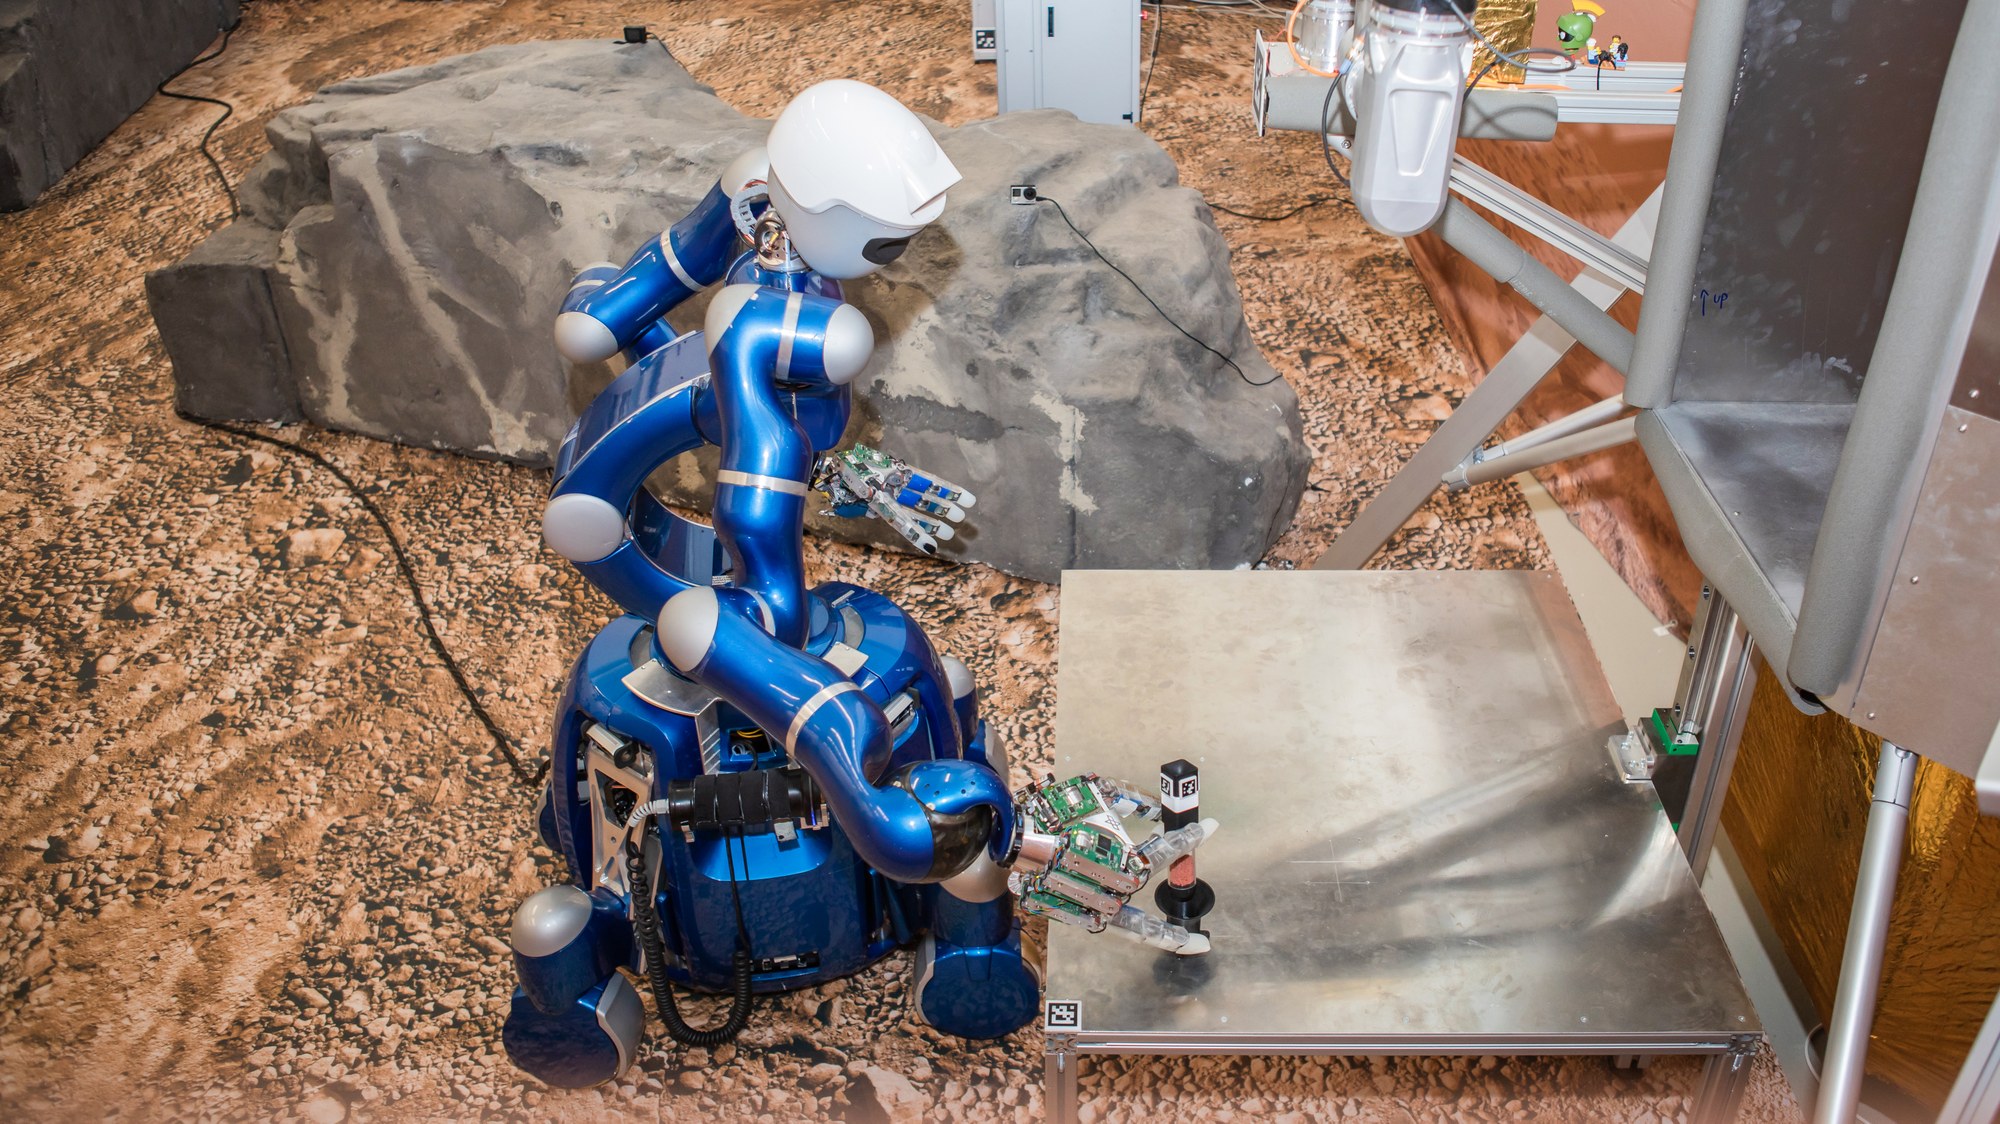 a humanoid robot on a mars-like landscape, beside a platform. the hand of the robot is outstretched to the platform and a sample is on top of it